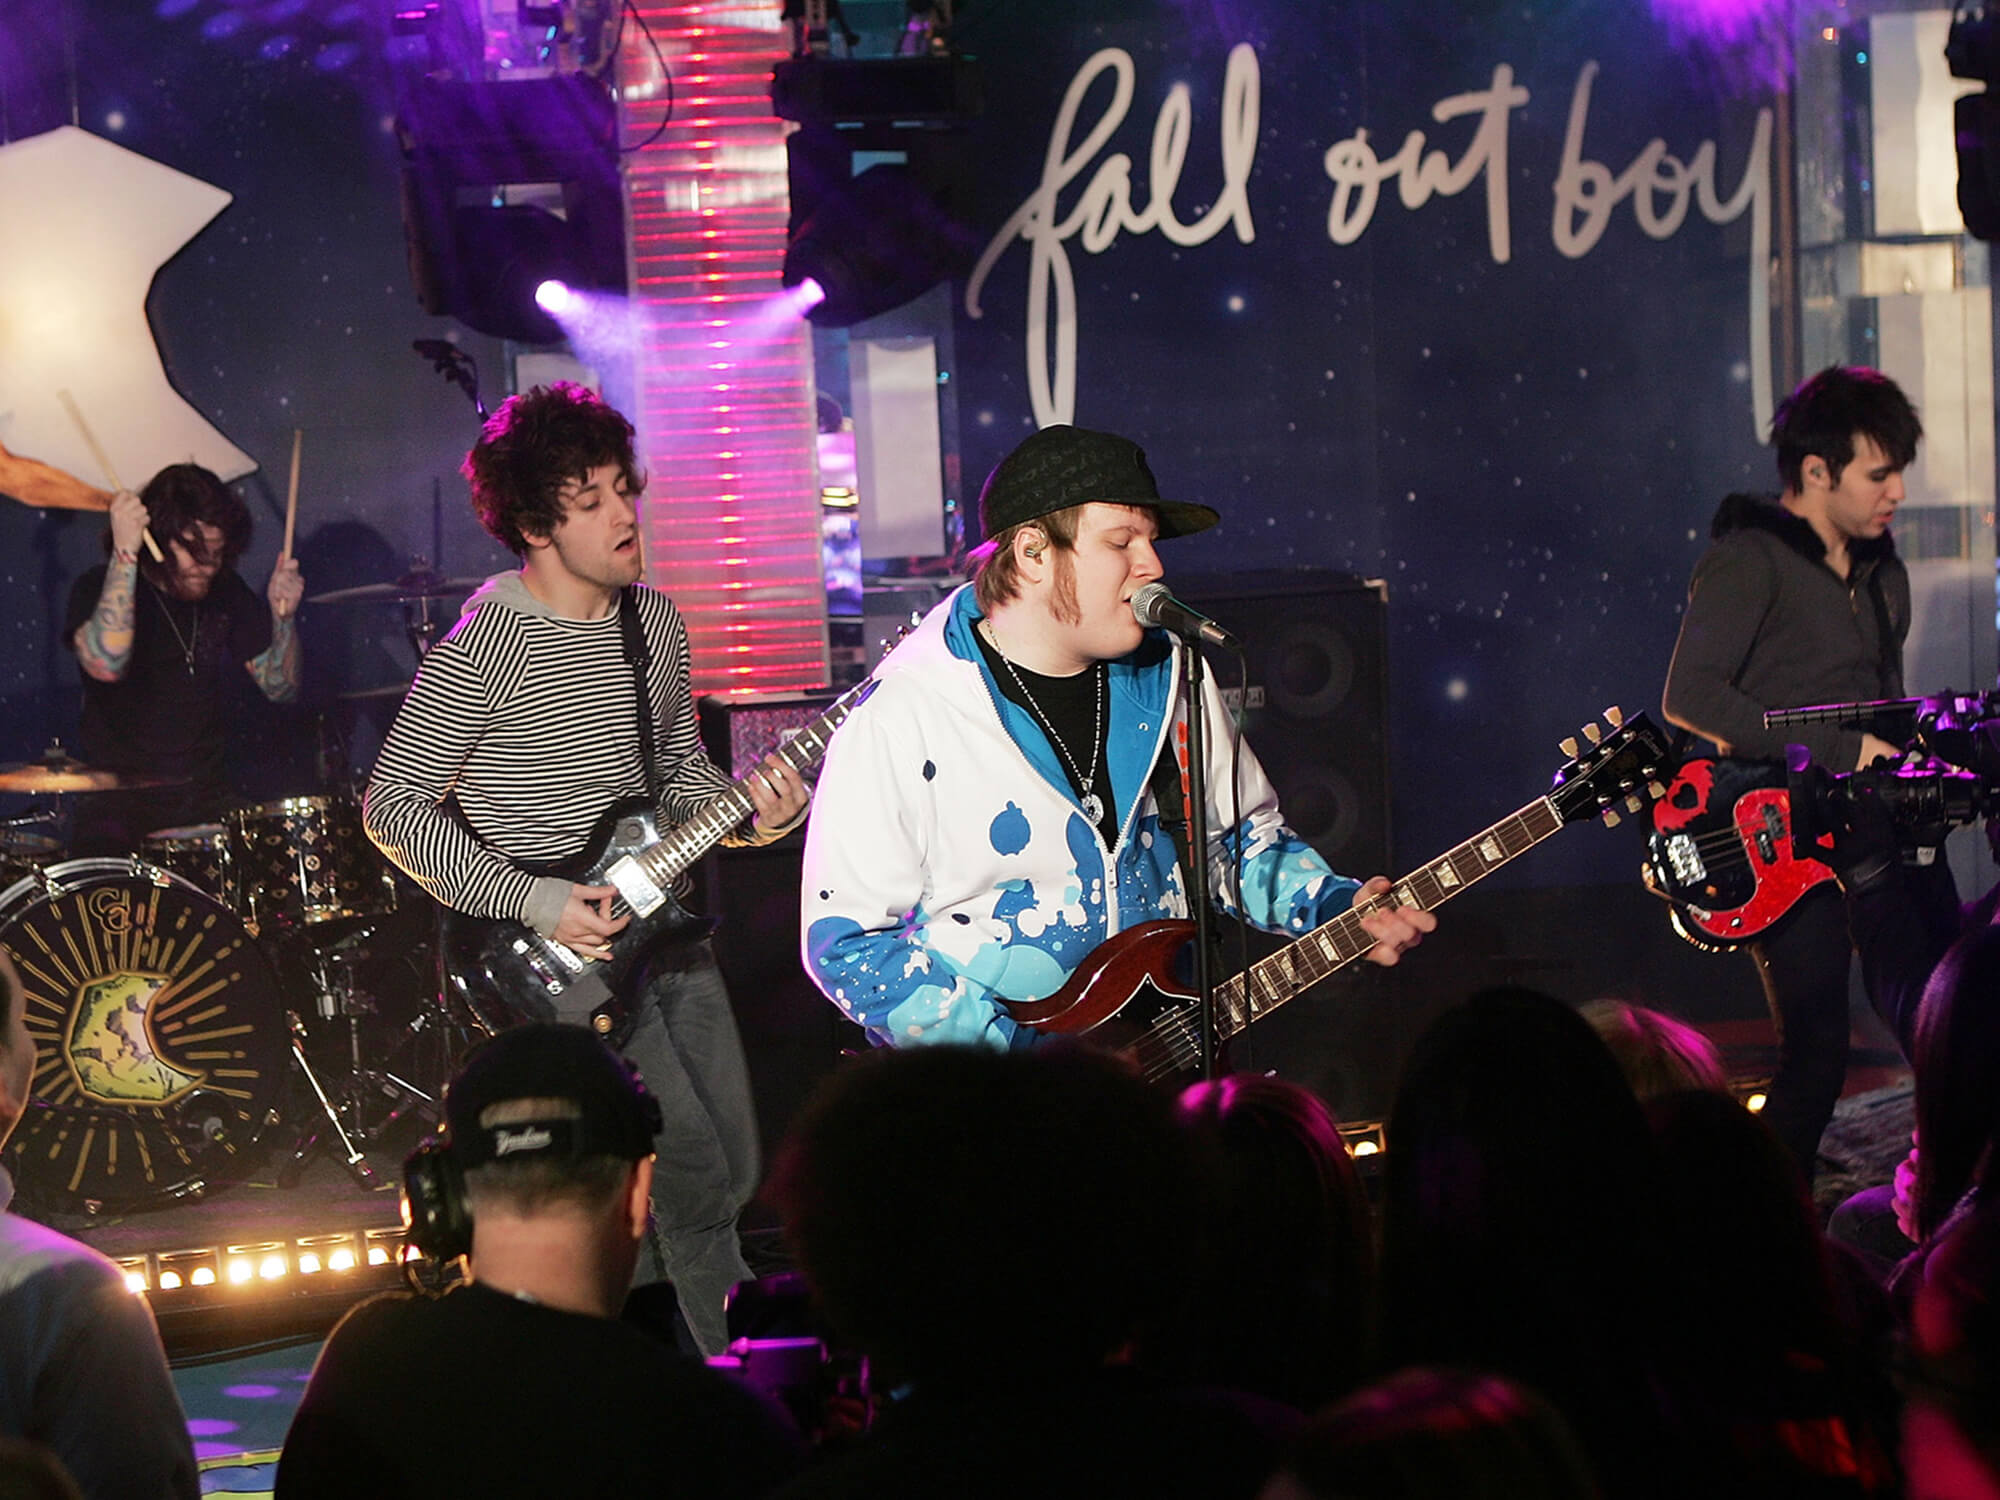 Fall Out Boy performing at MTV’s Total Request Live as part of “Infinity Flight 206 With Fall Out Boy” in 2007, by Scott Gries/Getty Images